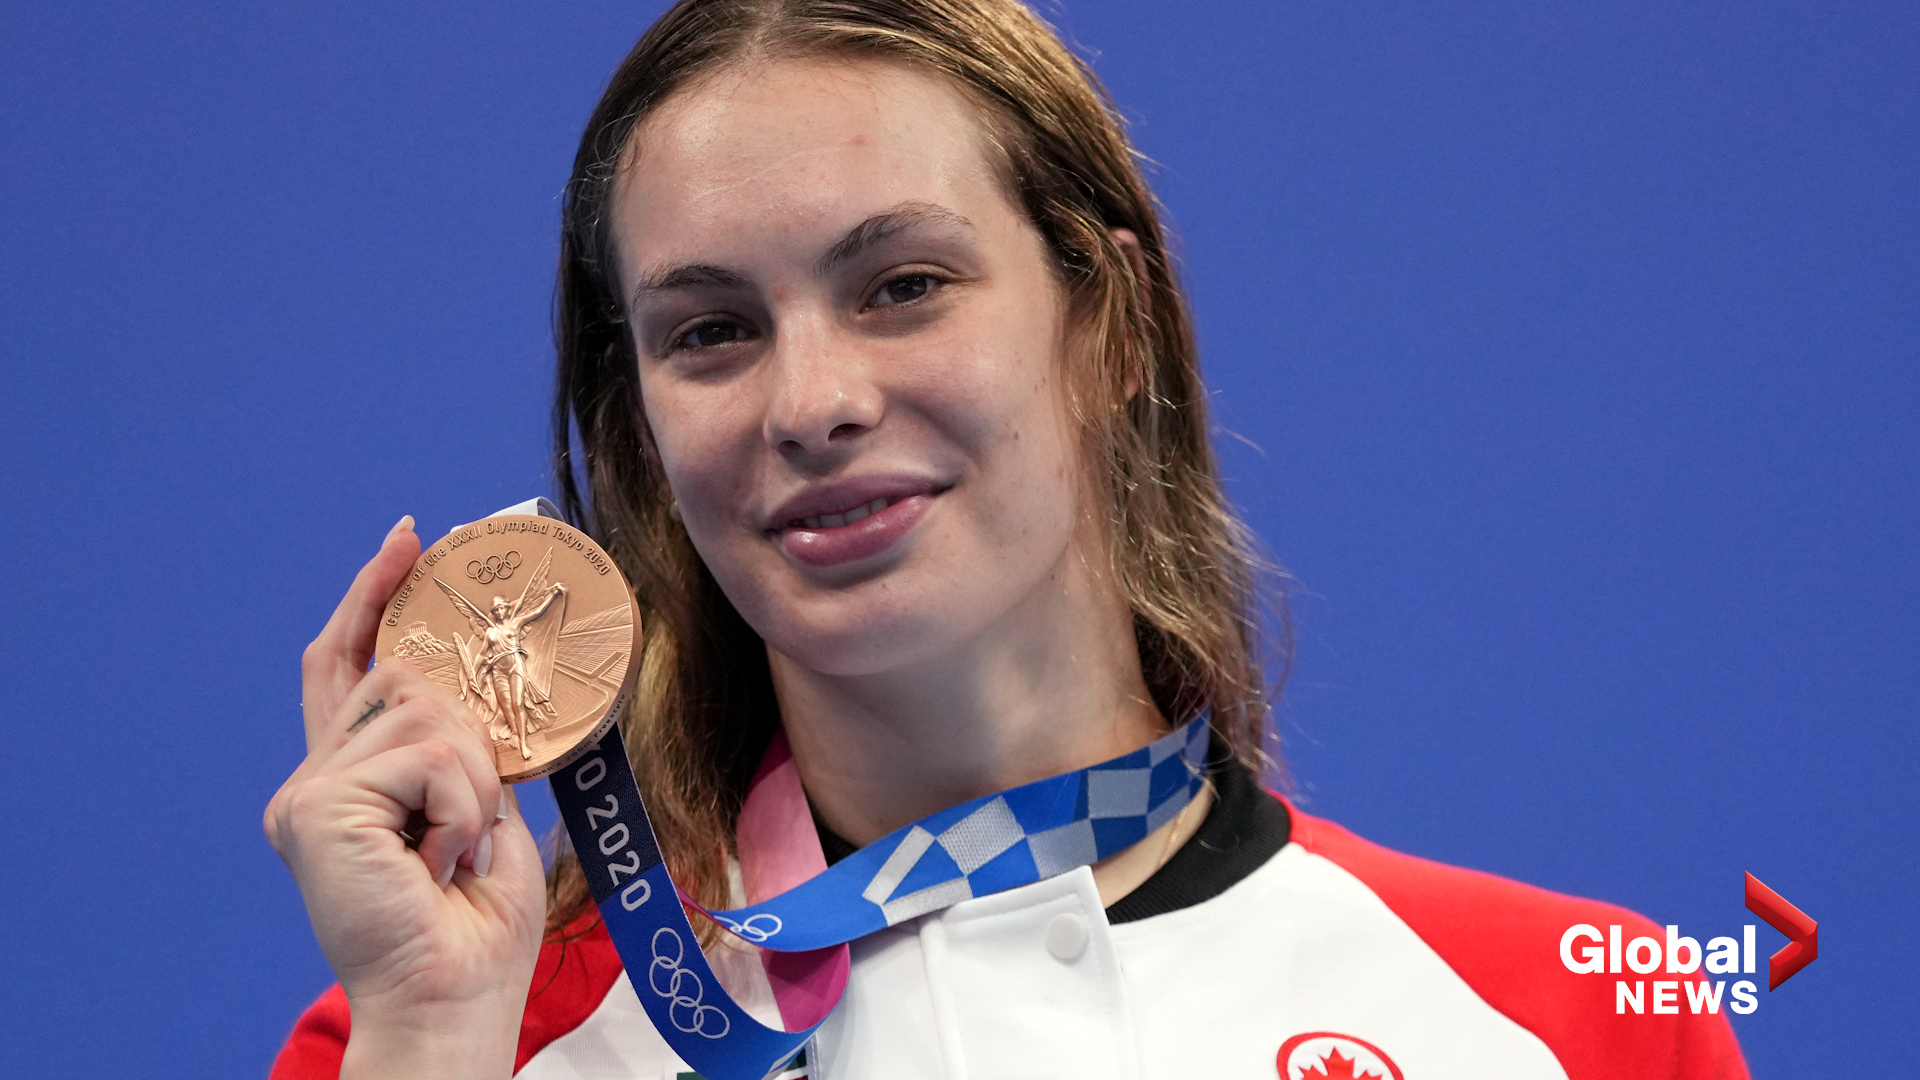 Canada's most decorated Olympian struggled to untangle her 7 medals while  on camera at an NHL game